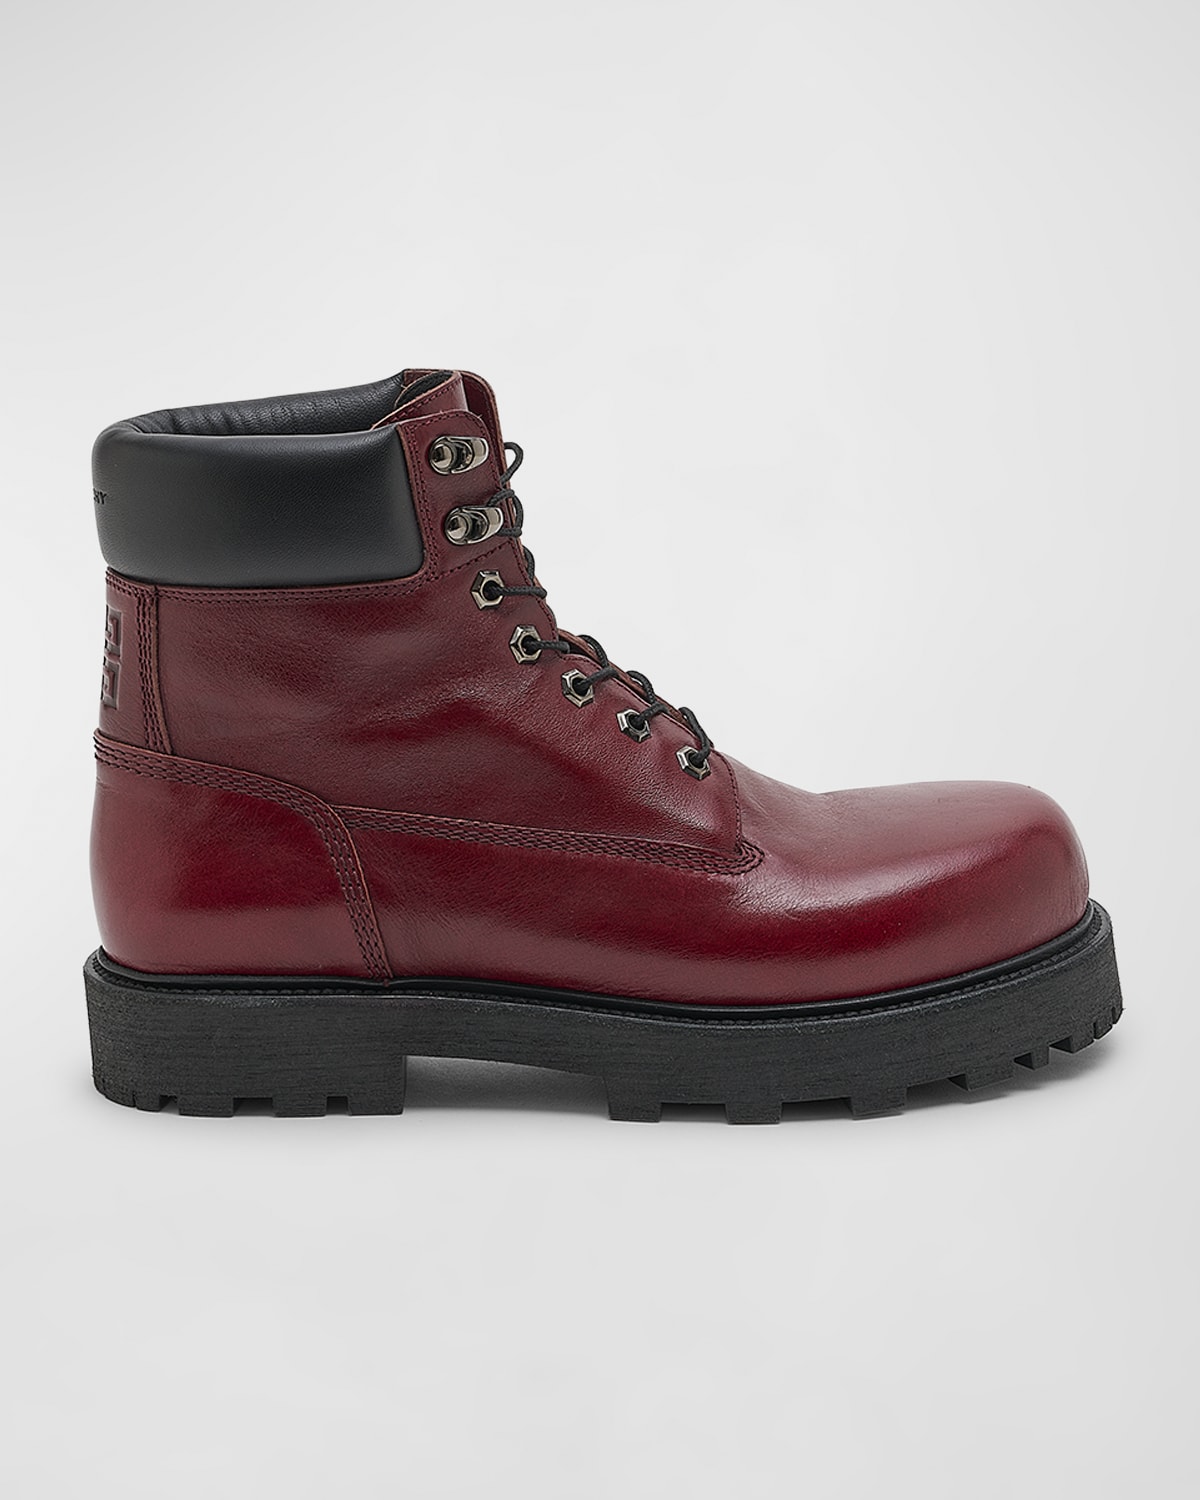 Men's Show Leather Lace-Up Boots